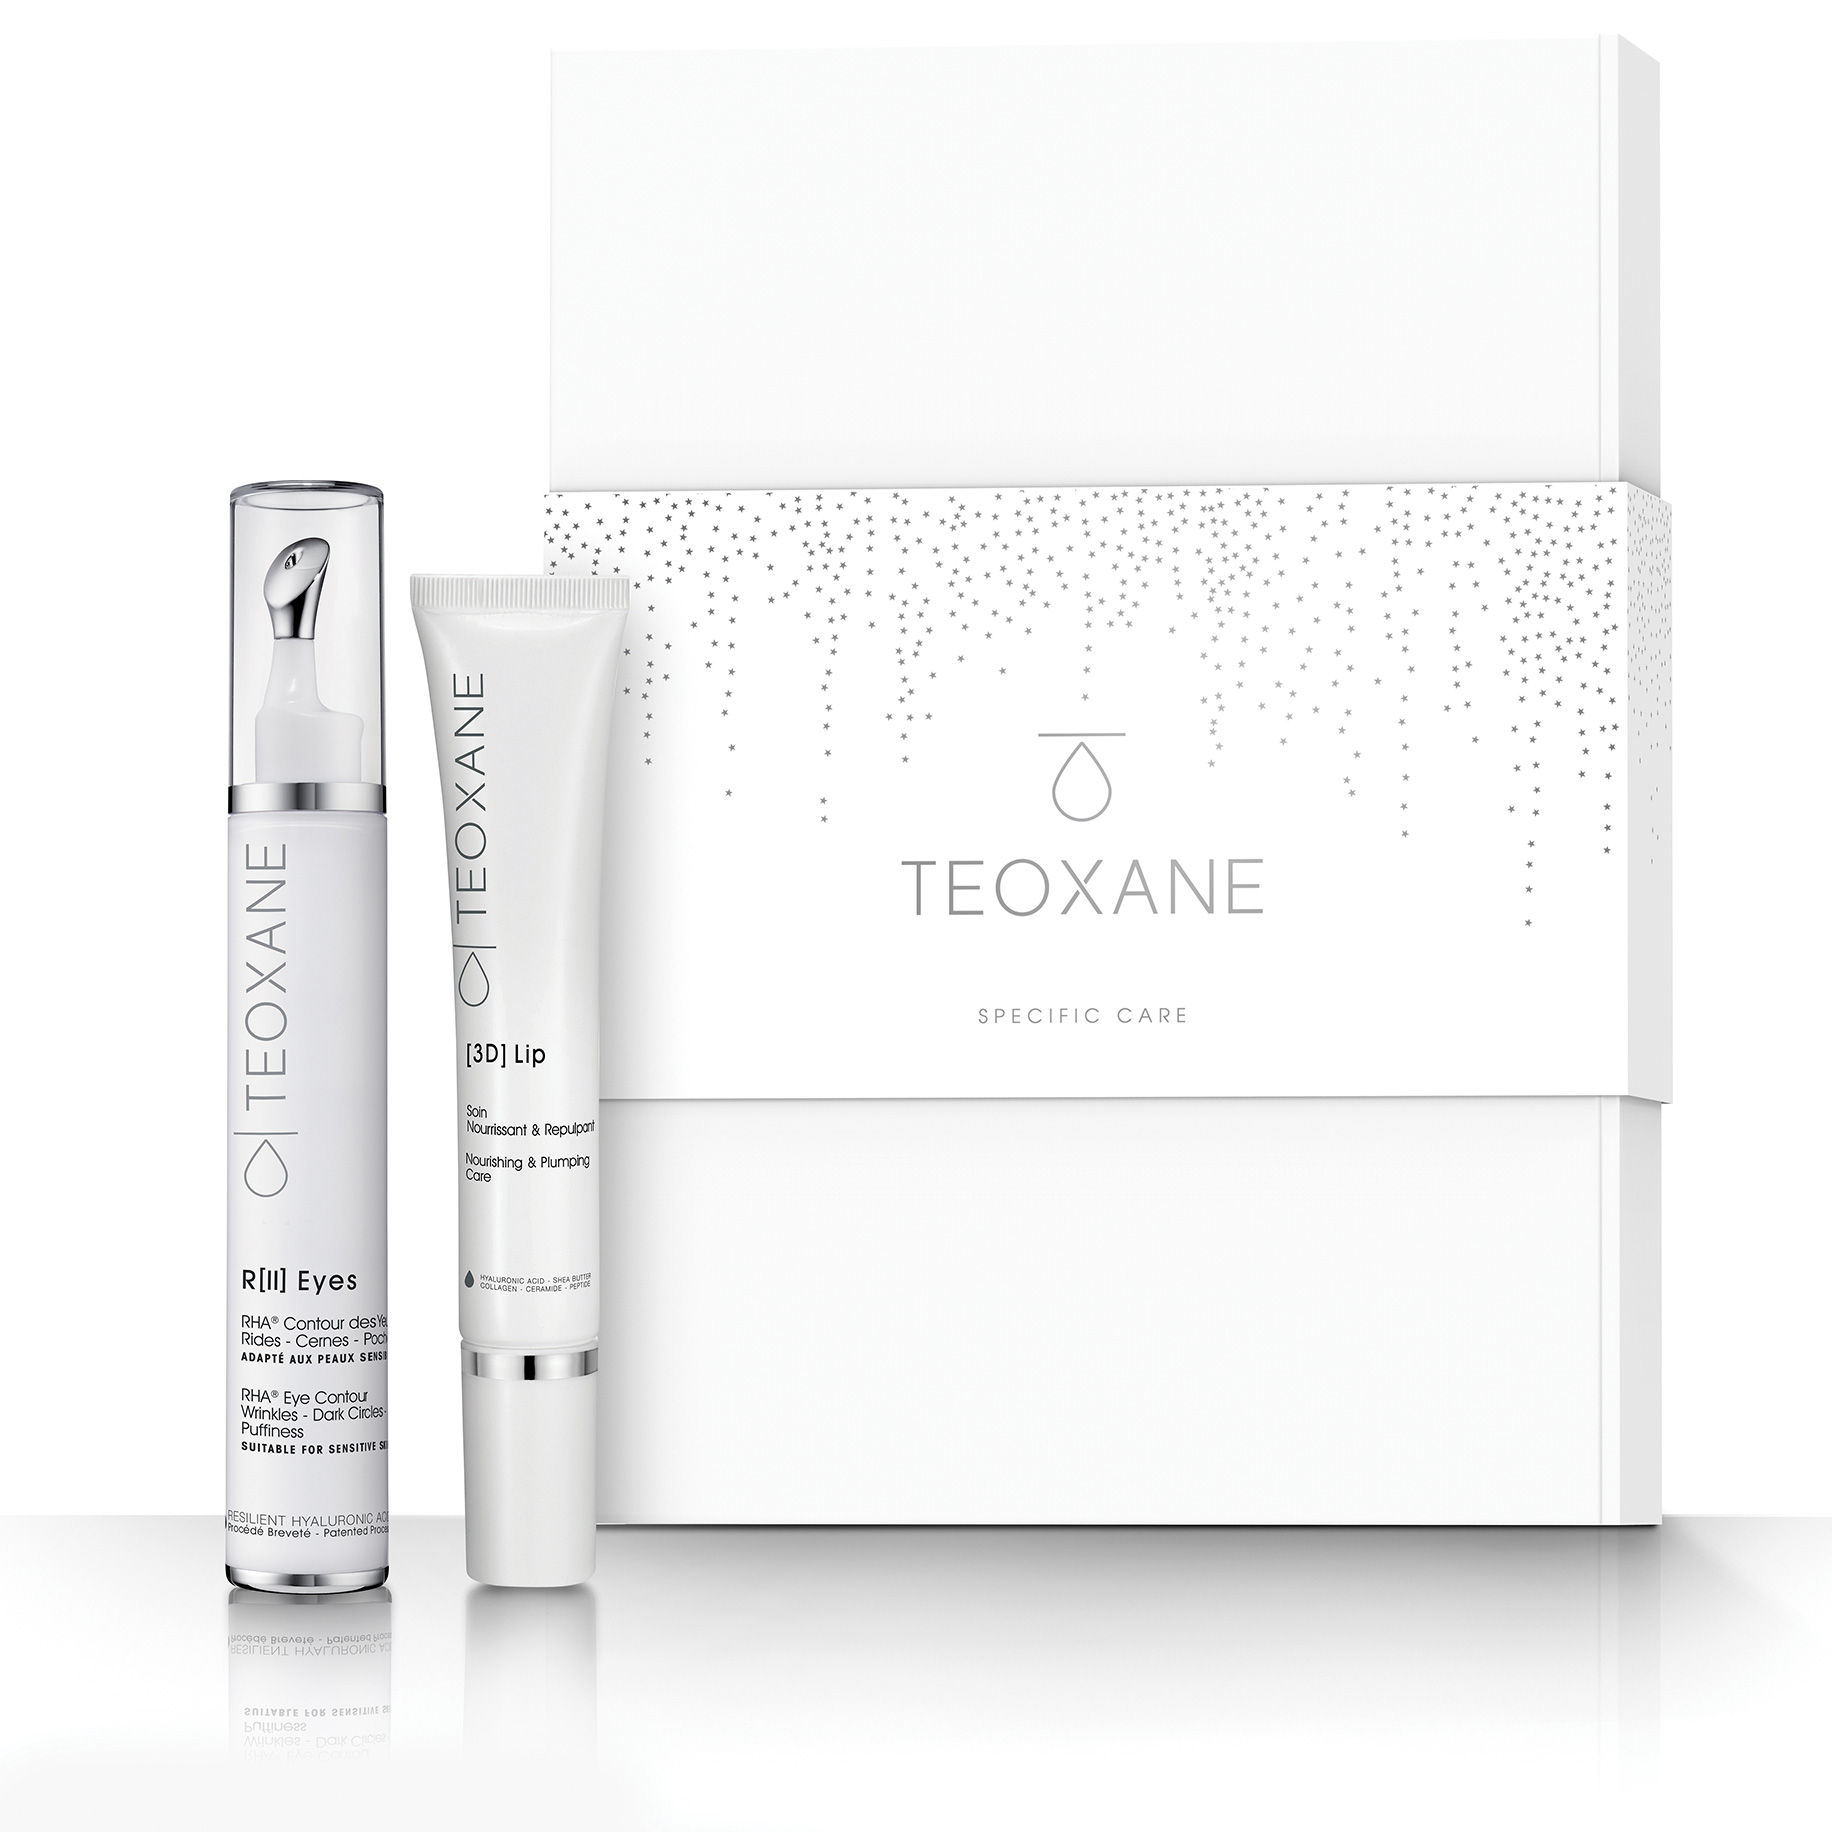 Teoxane Specific Care - Gift Collection 